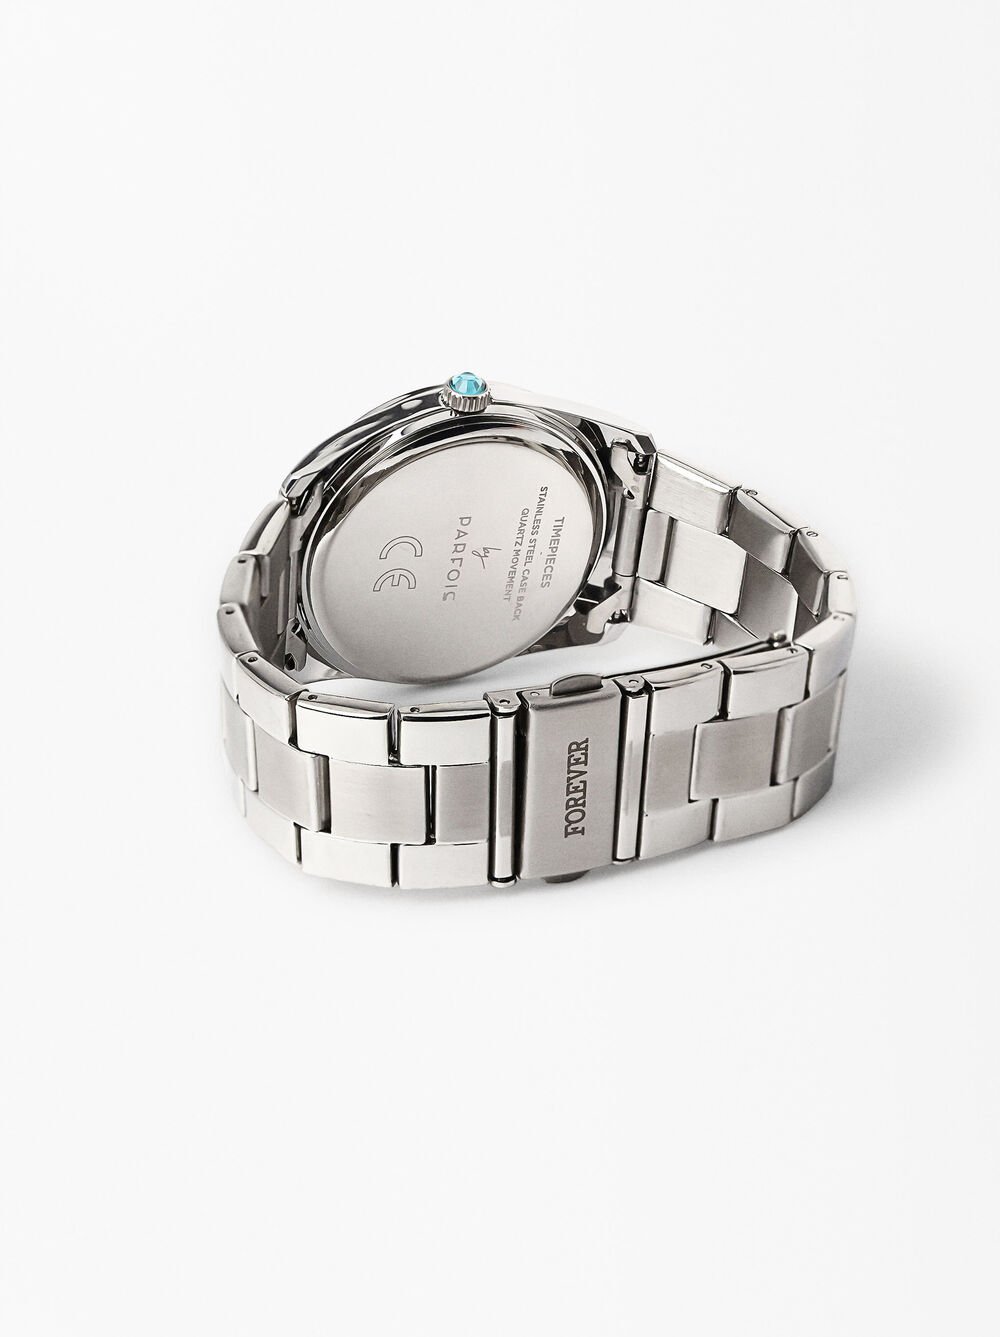 Personalized Watch With Crystals